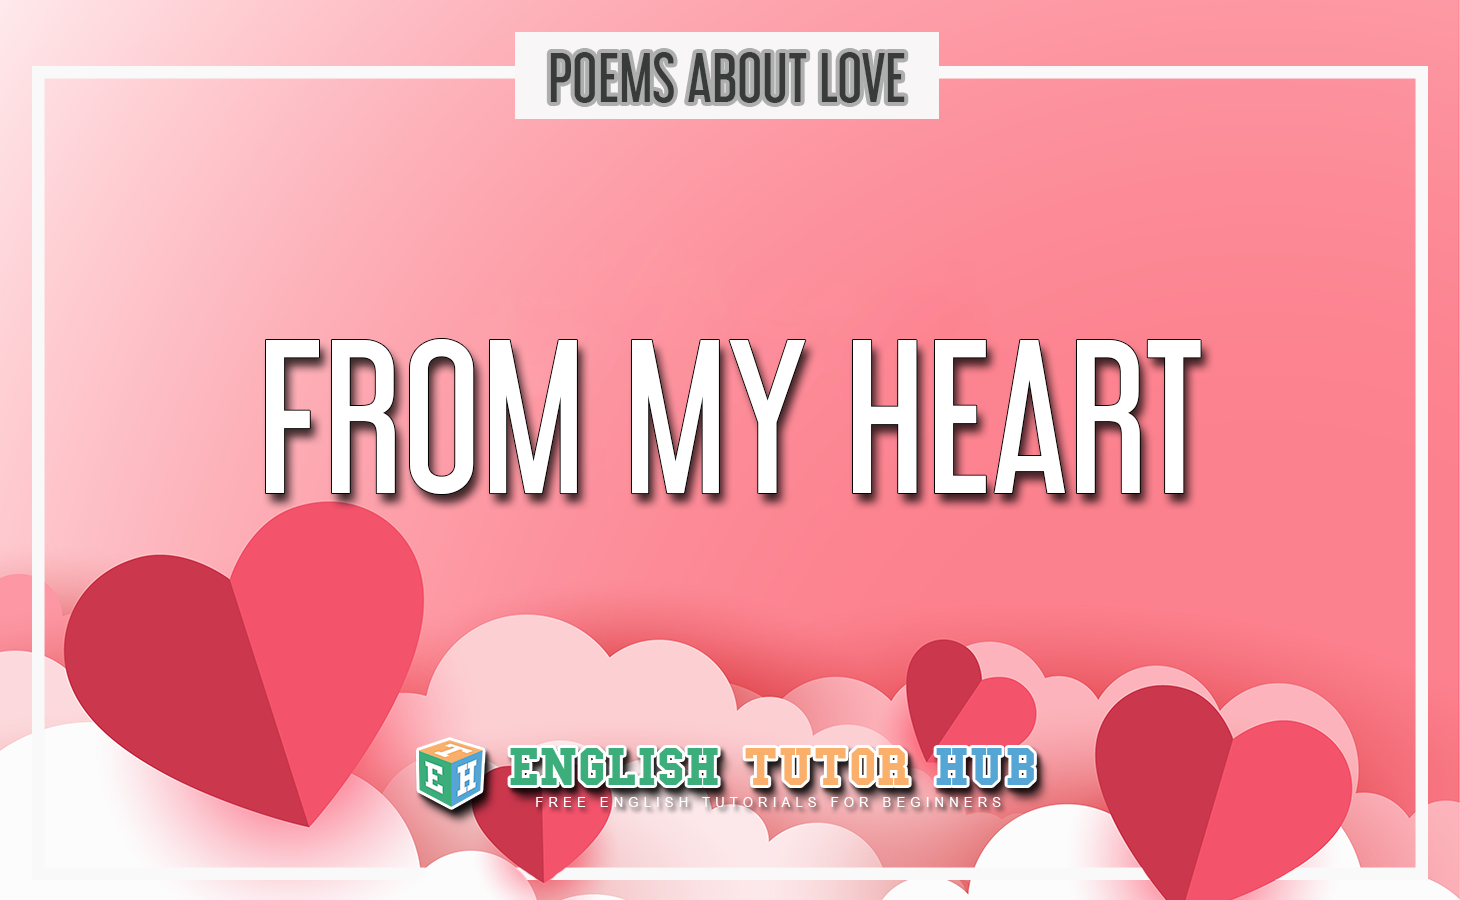 From My Heart - Poems About Love Summary and Lesson [2022]